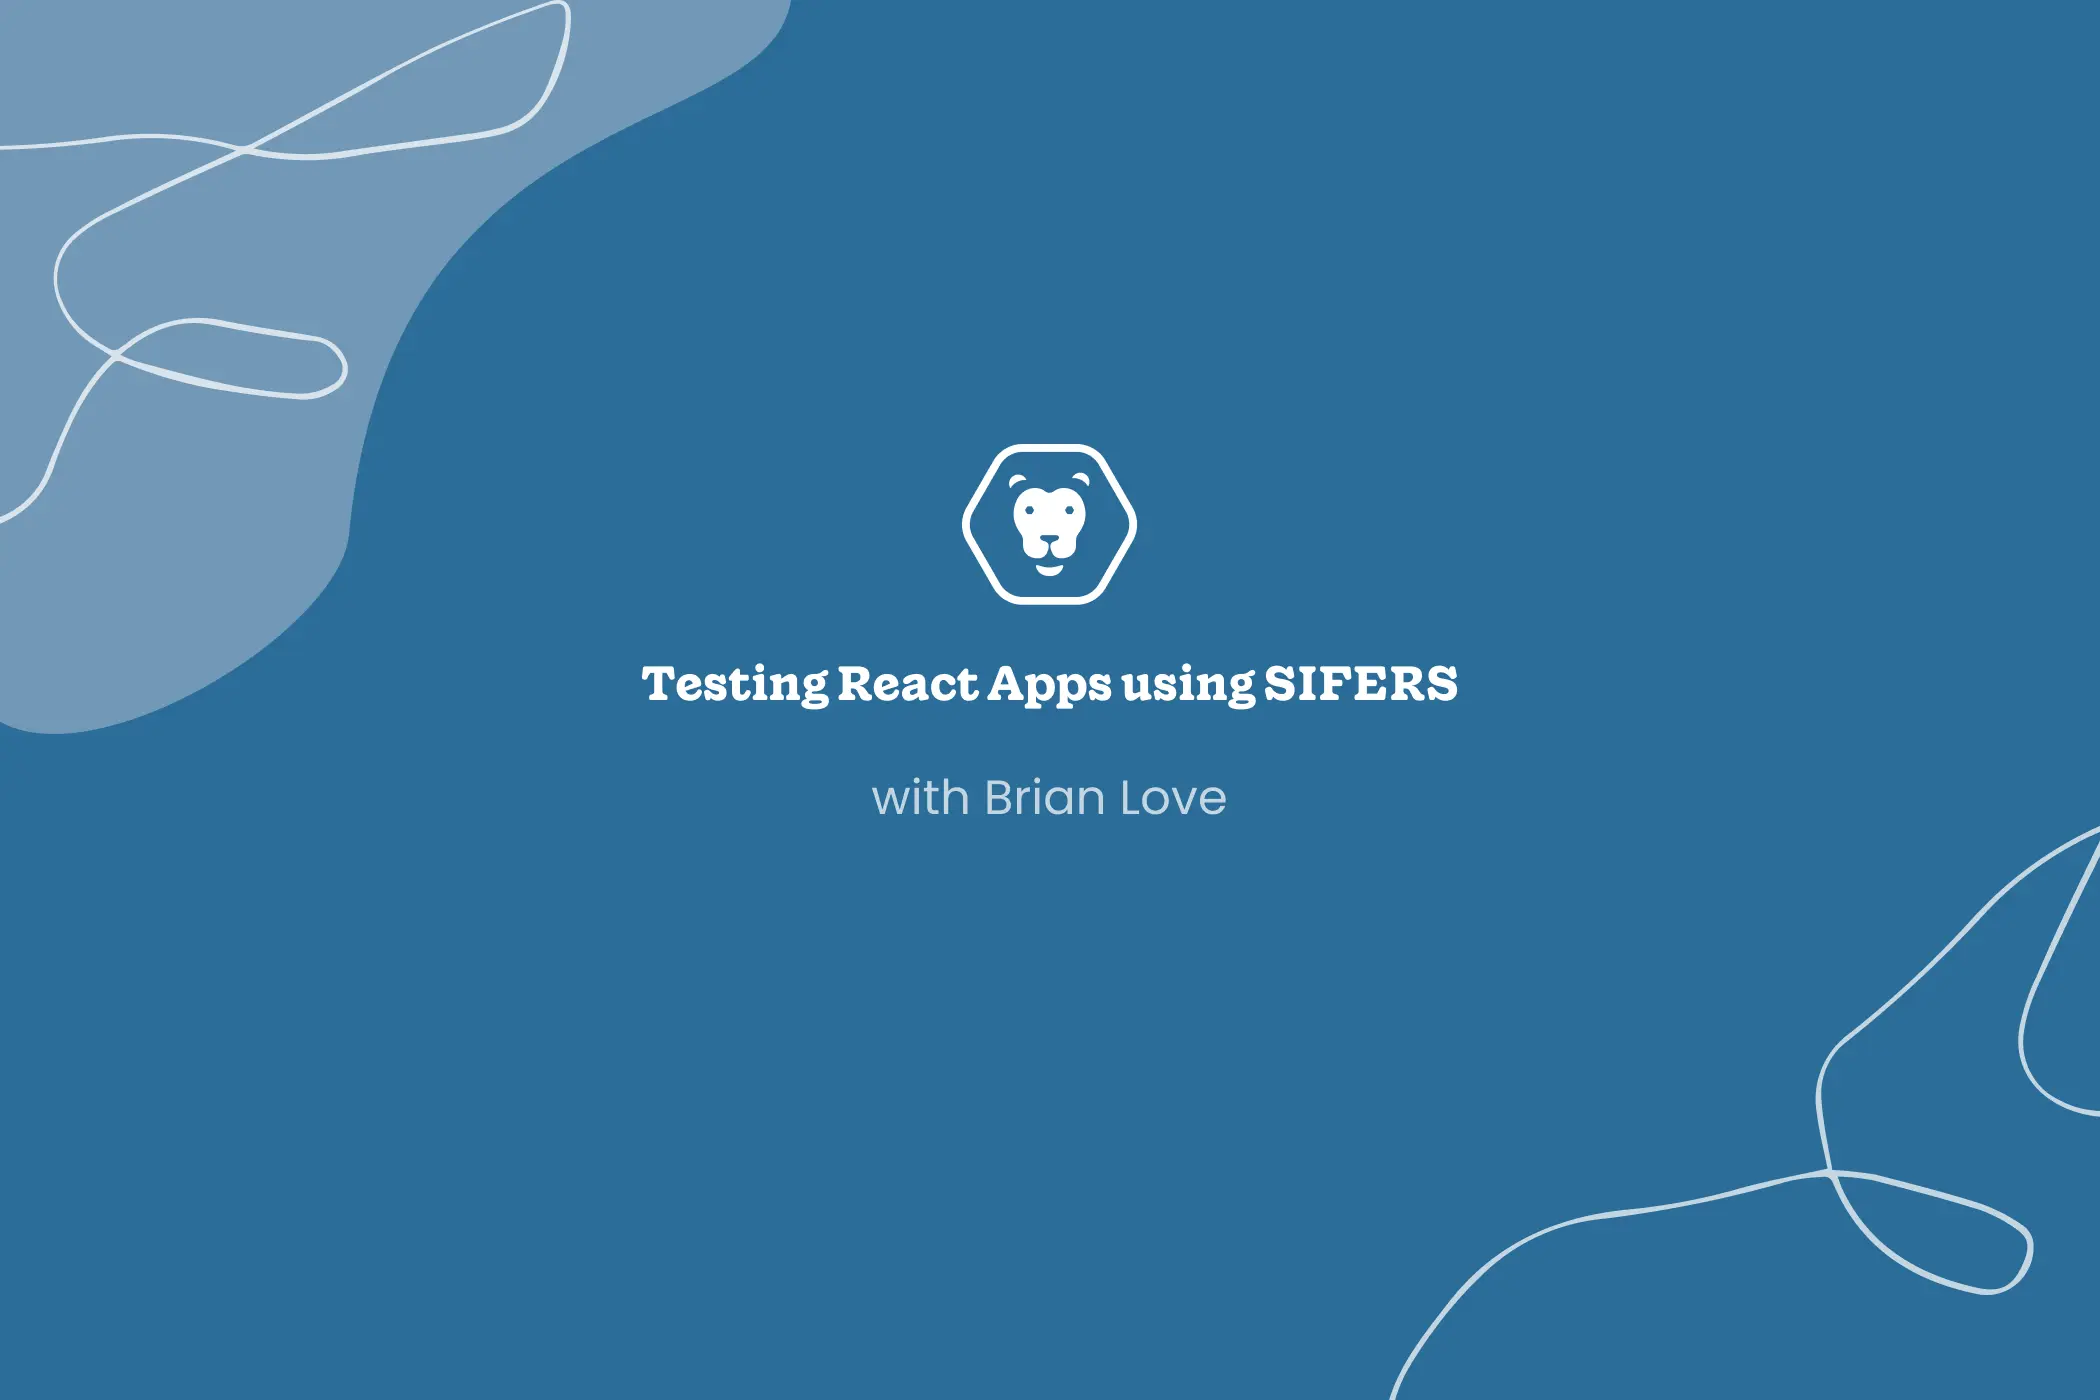 Testing React Apps using SIFERS